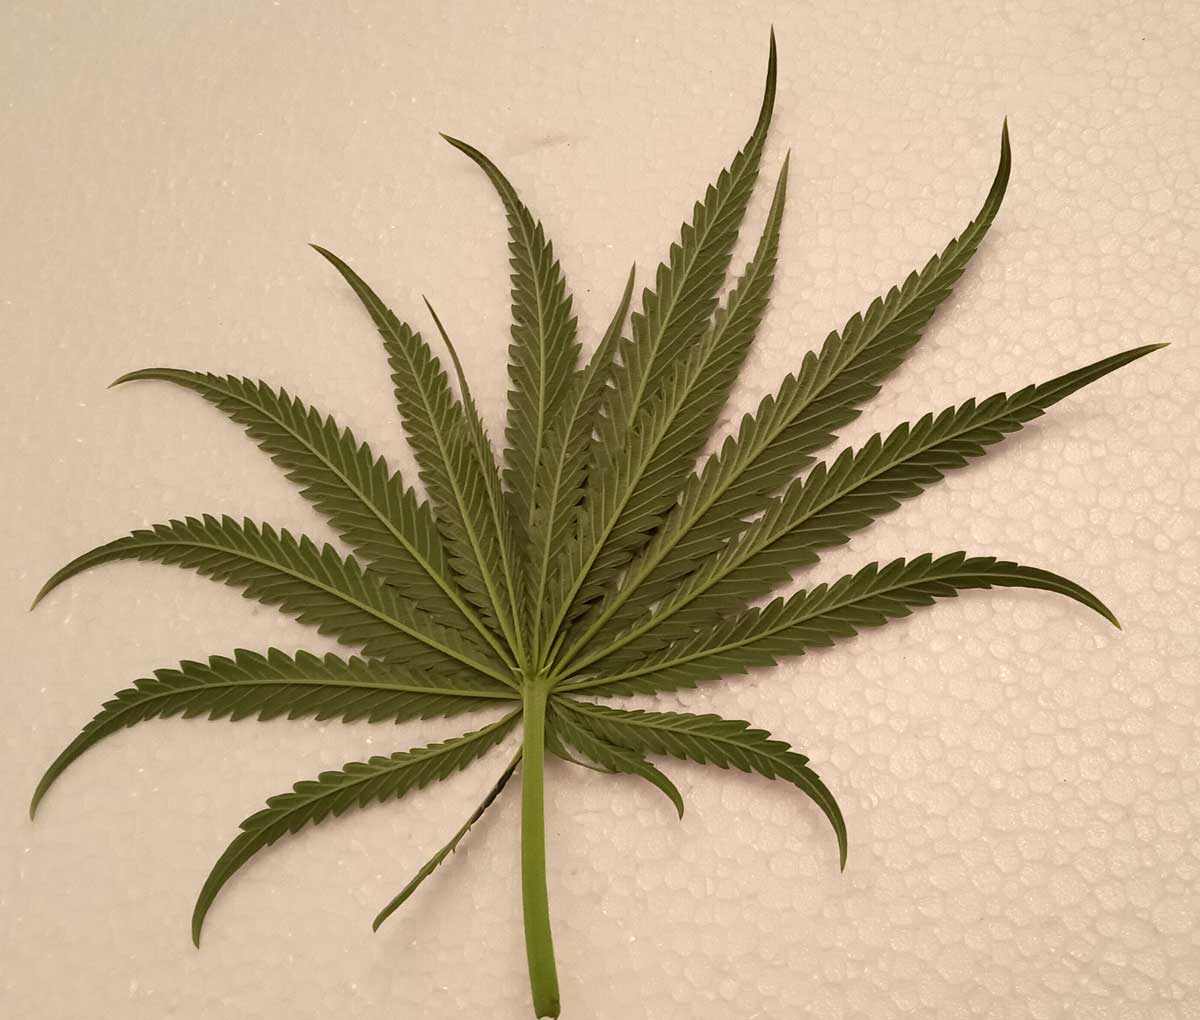 Why Some Pot Leaves Have More "Fingers" Than Others | Grow Weed Easy